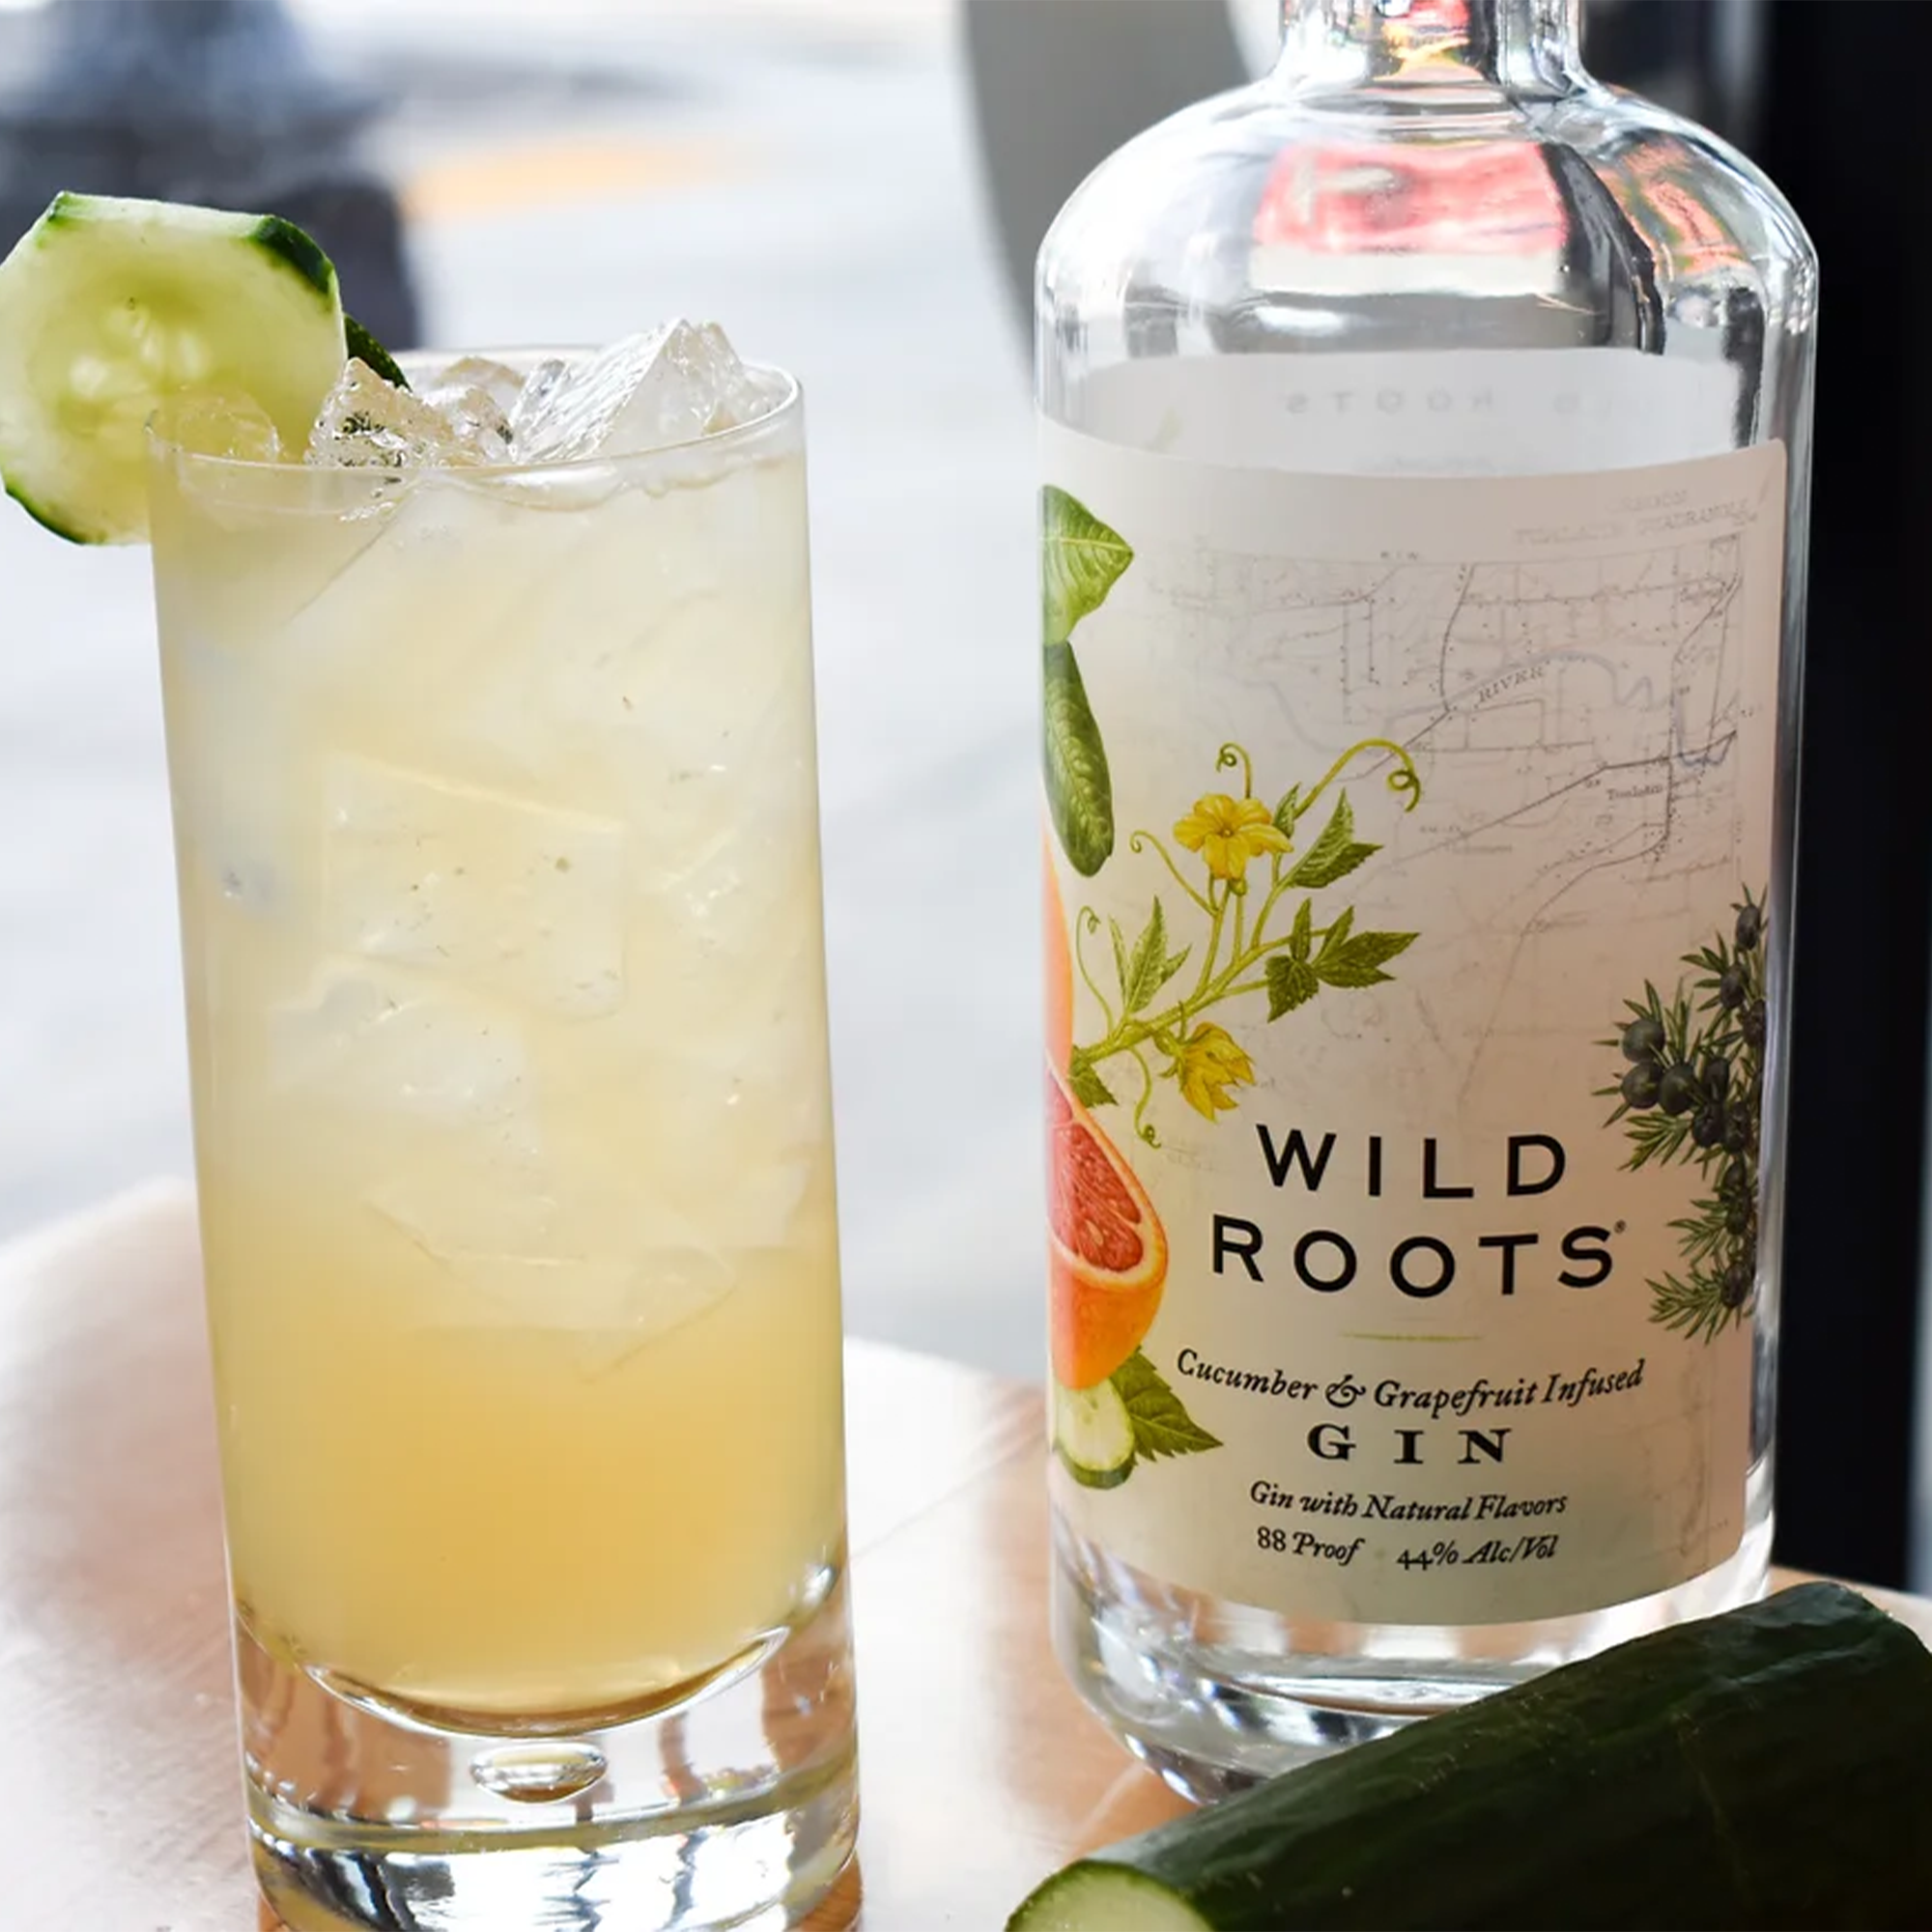 Wild Roots Cucumber and Grapefruit Gin